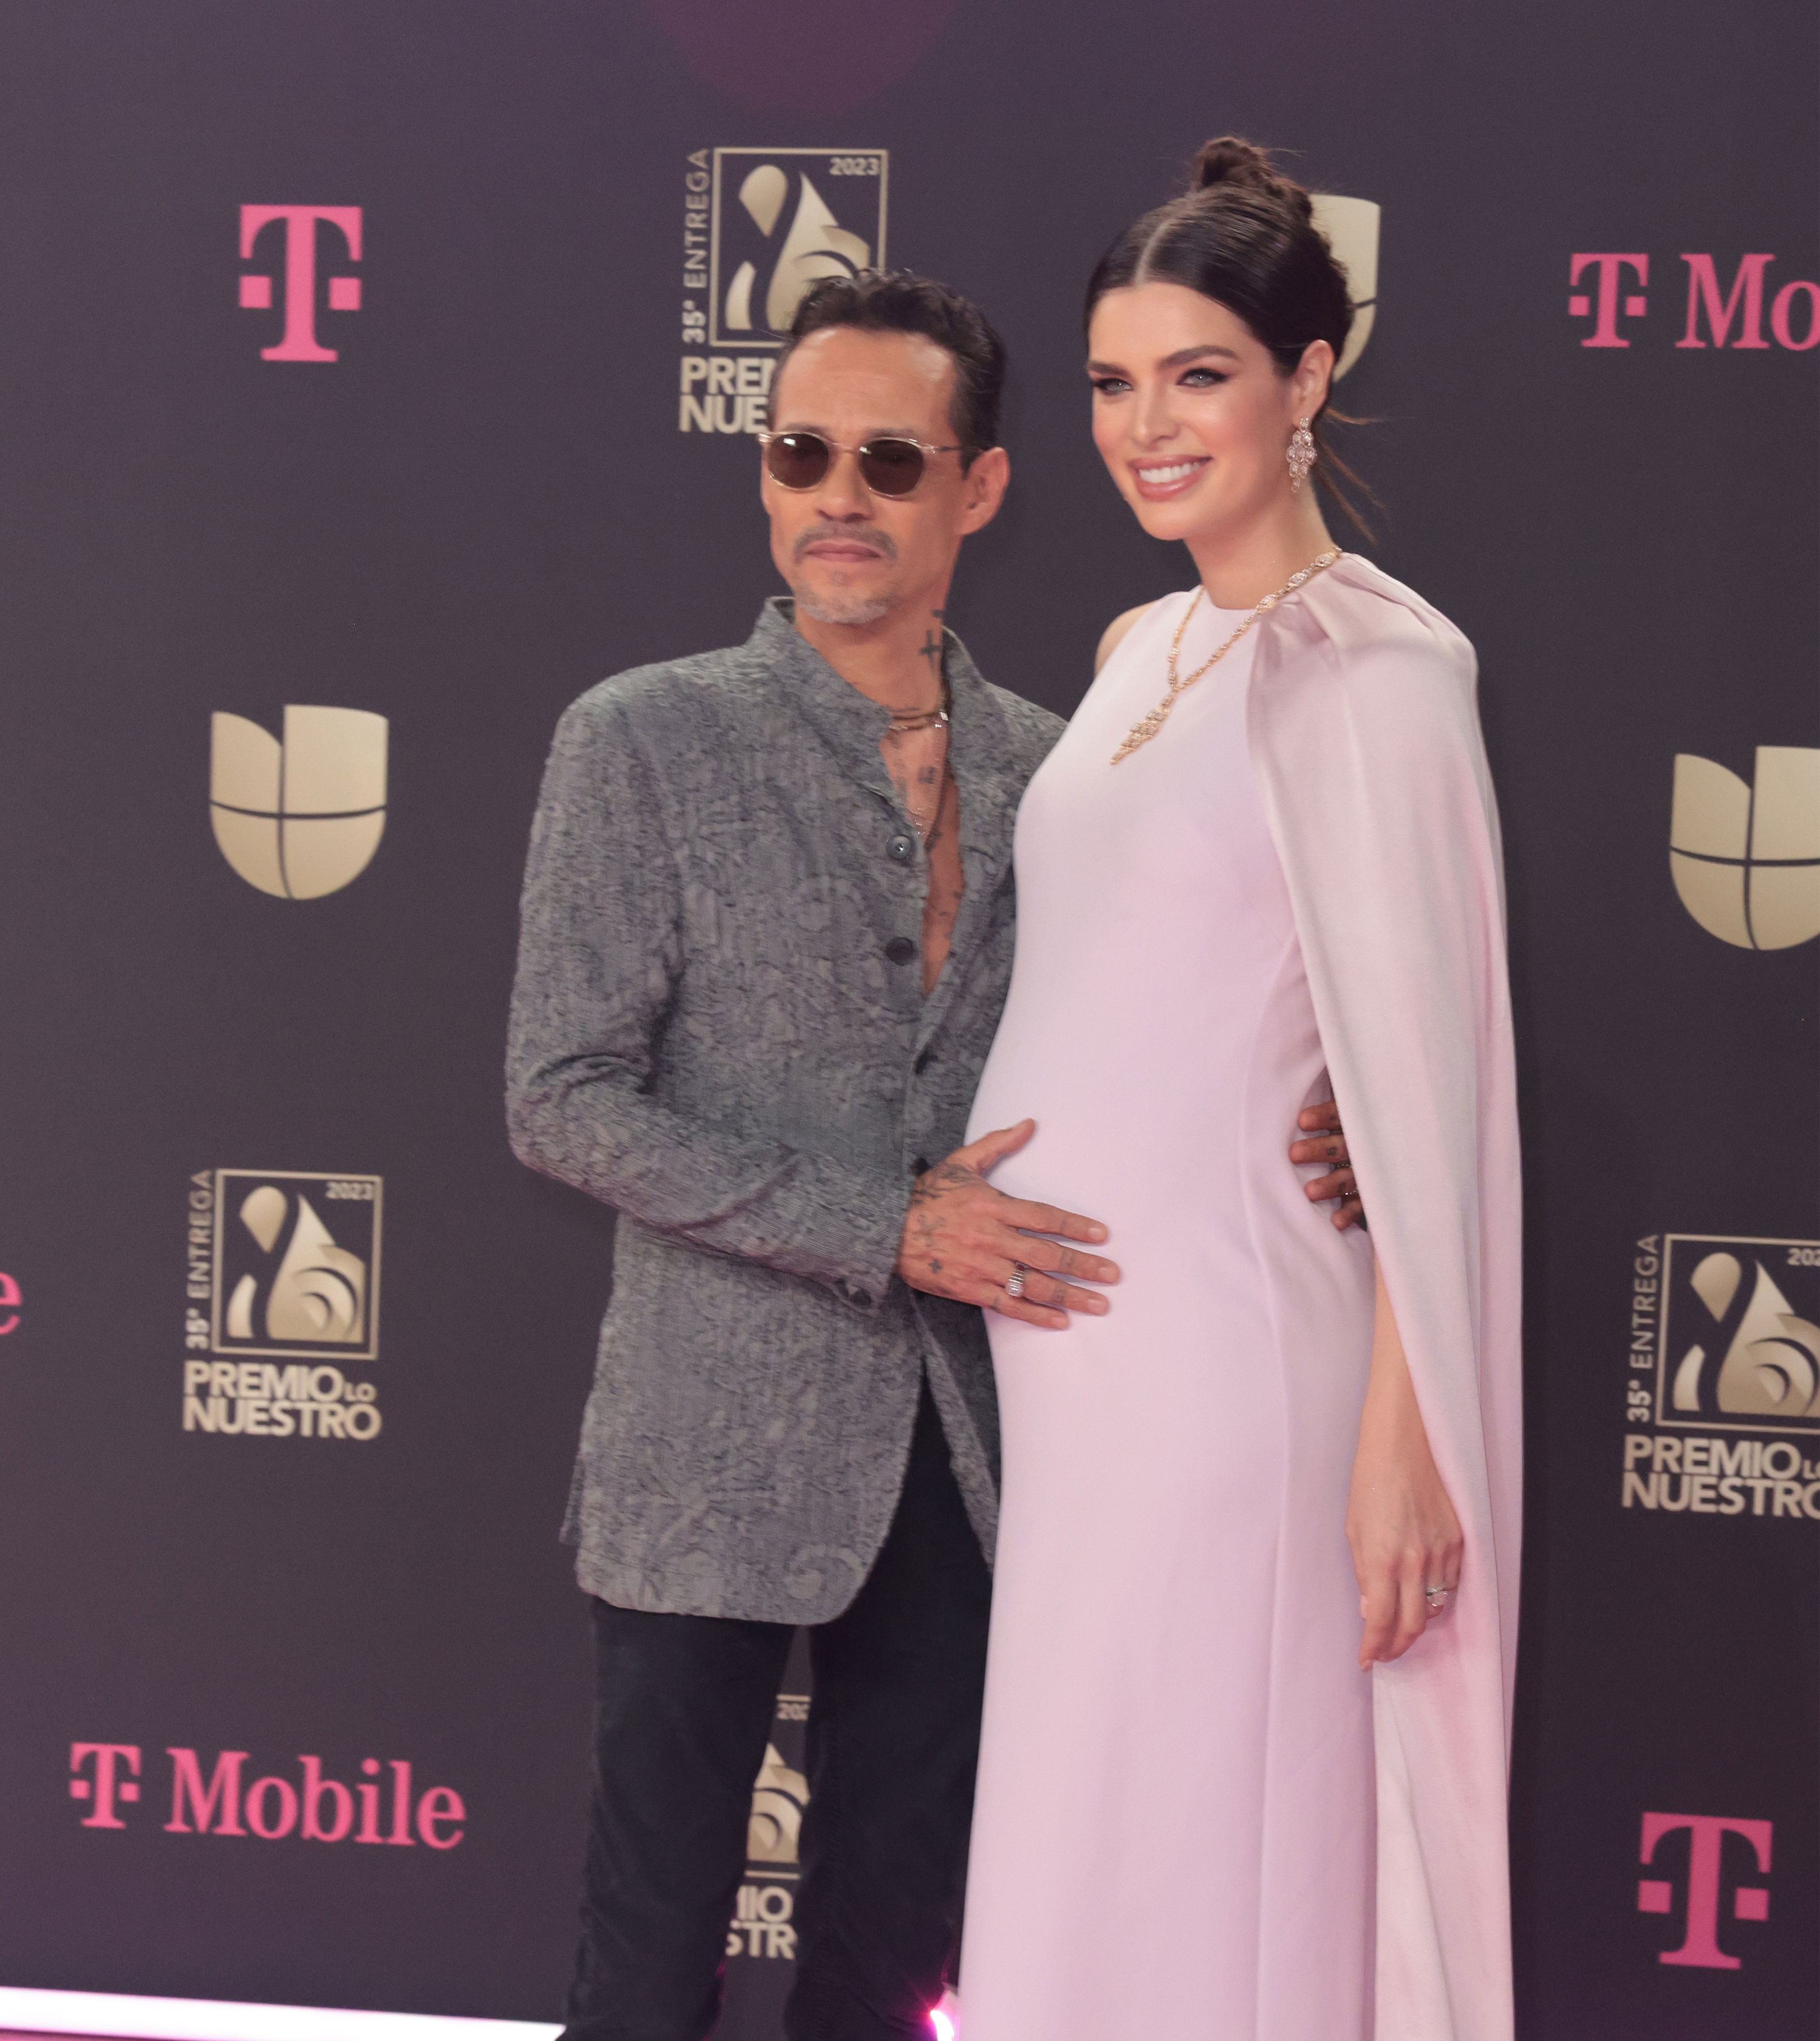 <p><span>In January 2023, Marc Anthony -- who was 54 at the time -- married model Nadia Ferreira, who's more than 30 years his junior. The music star and the former Miss Universe Paraguay, who was 23 when she said "I do," first sparked romance rumors in early 2022 when she was 22. She gave birth to a child -- her first, his seventh -- in June 2023.</span></p>